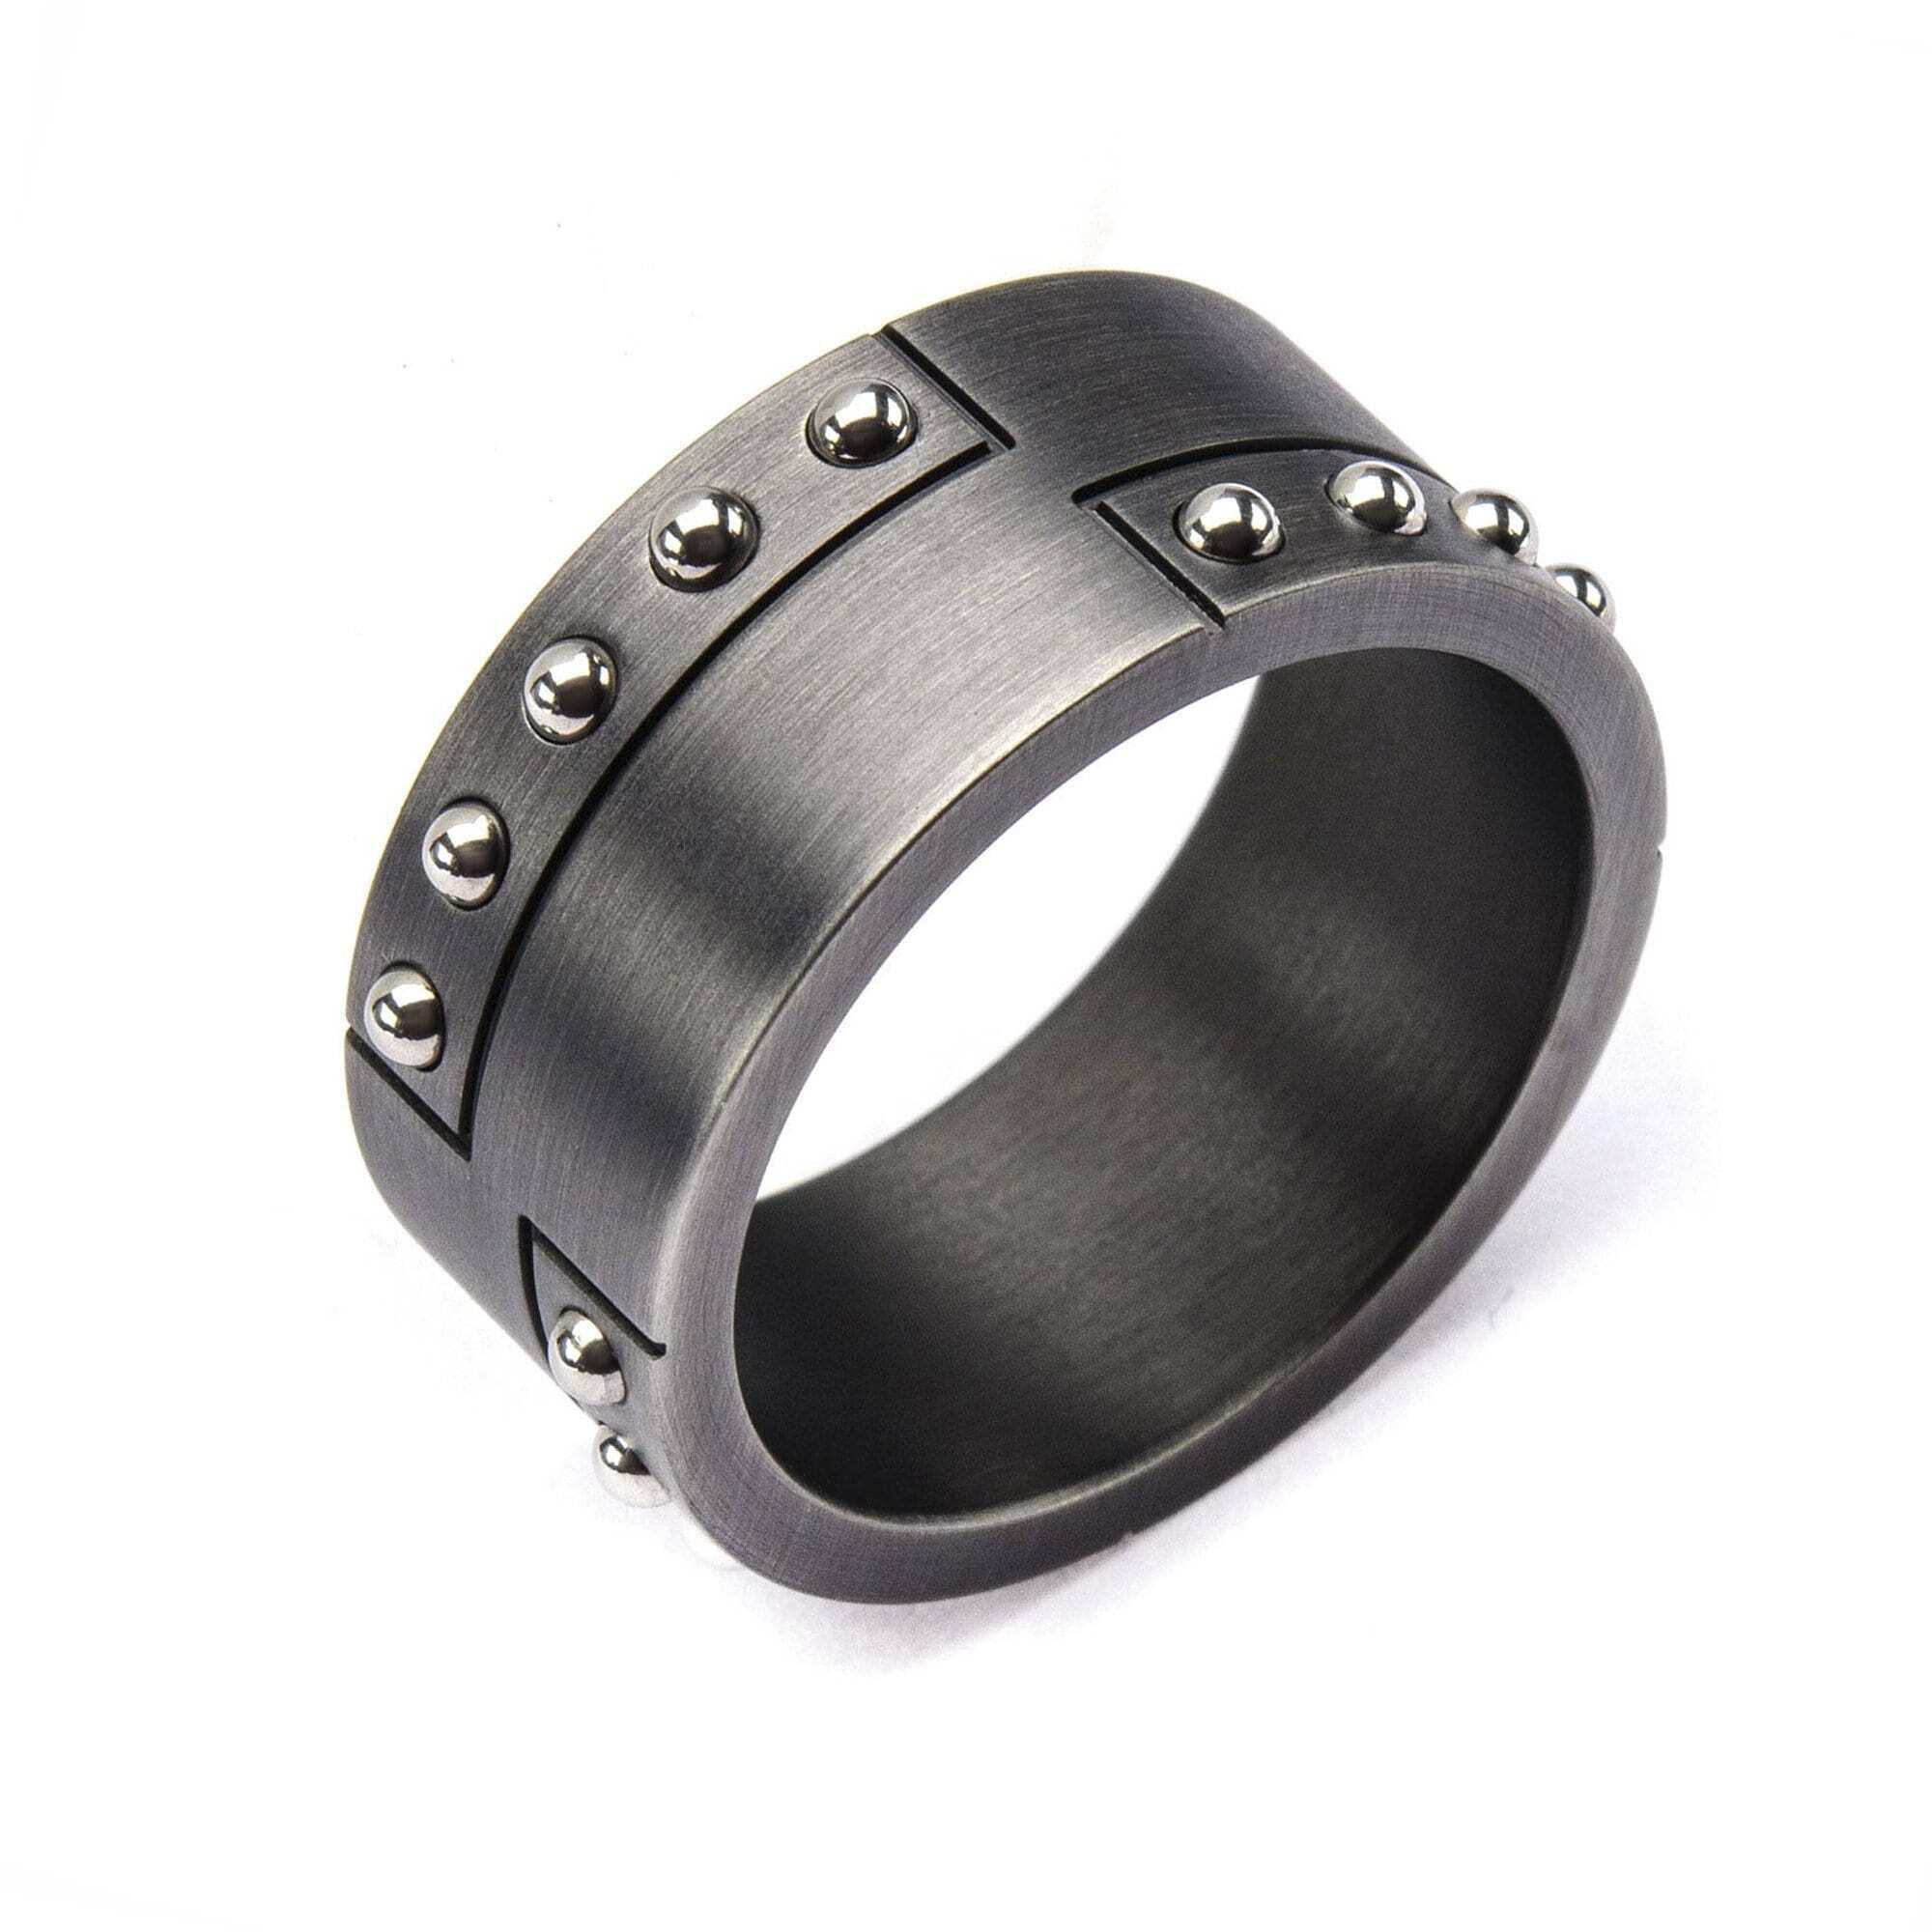 INOX JEWELRY Rings Silver Tone Stainless Steel Brushed Gunmetal Finish Beaded Band Ring